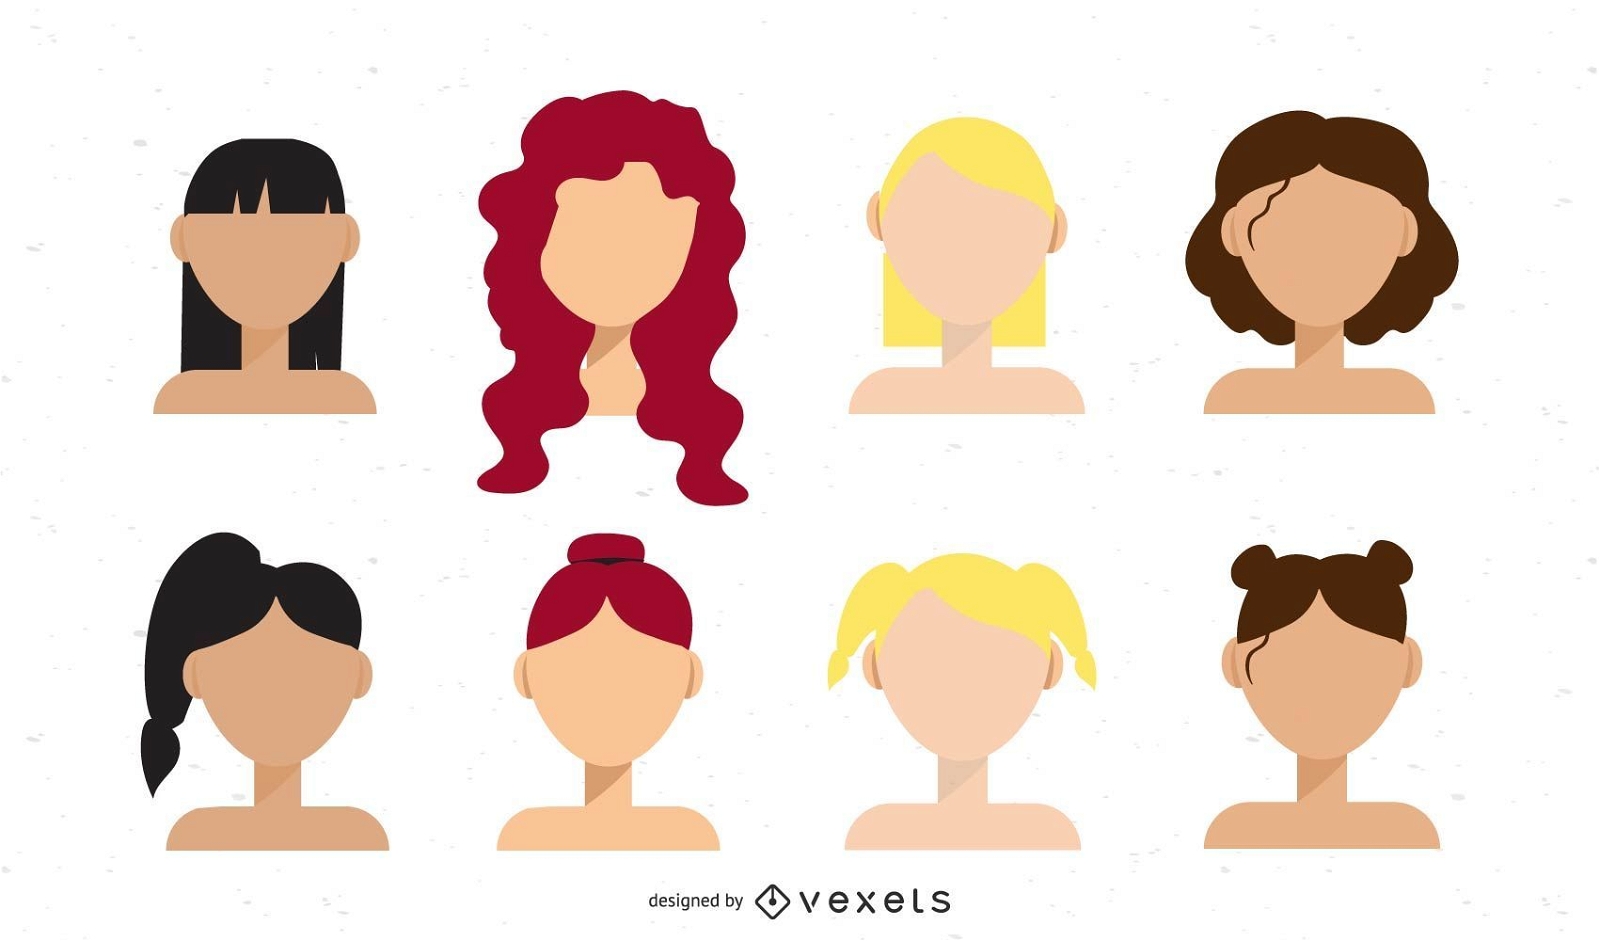 Hairstyles Vector & Graphics to Download